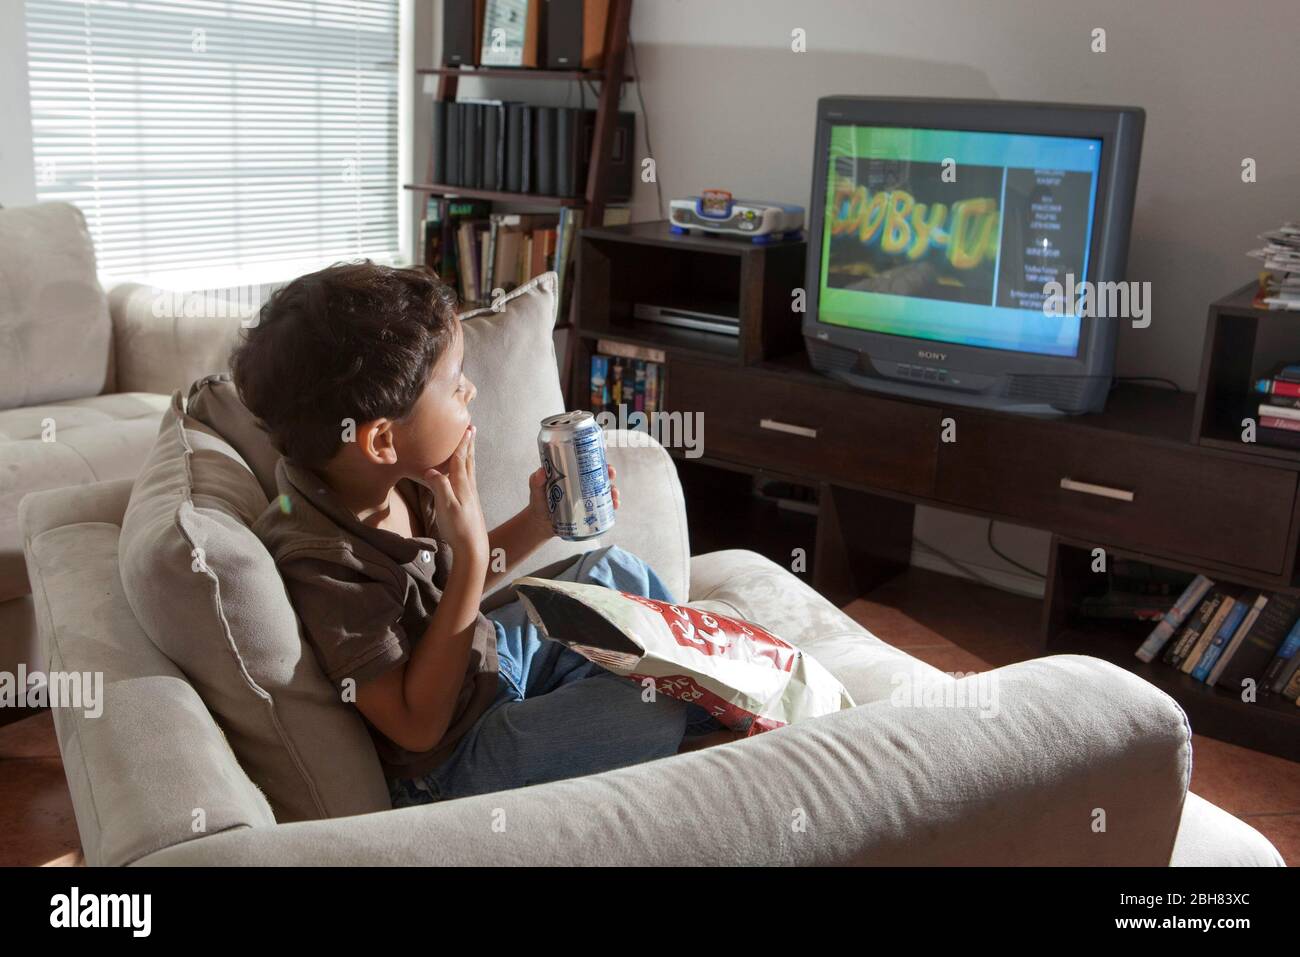 Austin, Texas  August 22, 2009: Five-year-old Mexican-American boy eating potato chips, drinking a soft drink and watching the Cartoon Network while sitting in an over-stuffed chair at home on a Saturday morning.  MR ©Bob Daemmrich Stock Photo